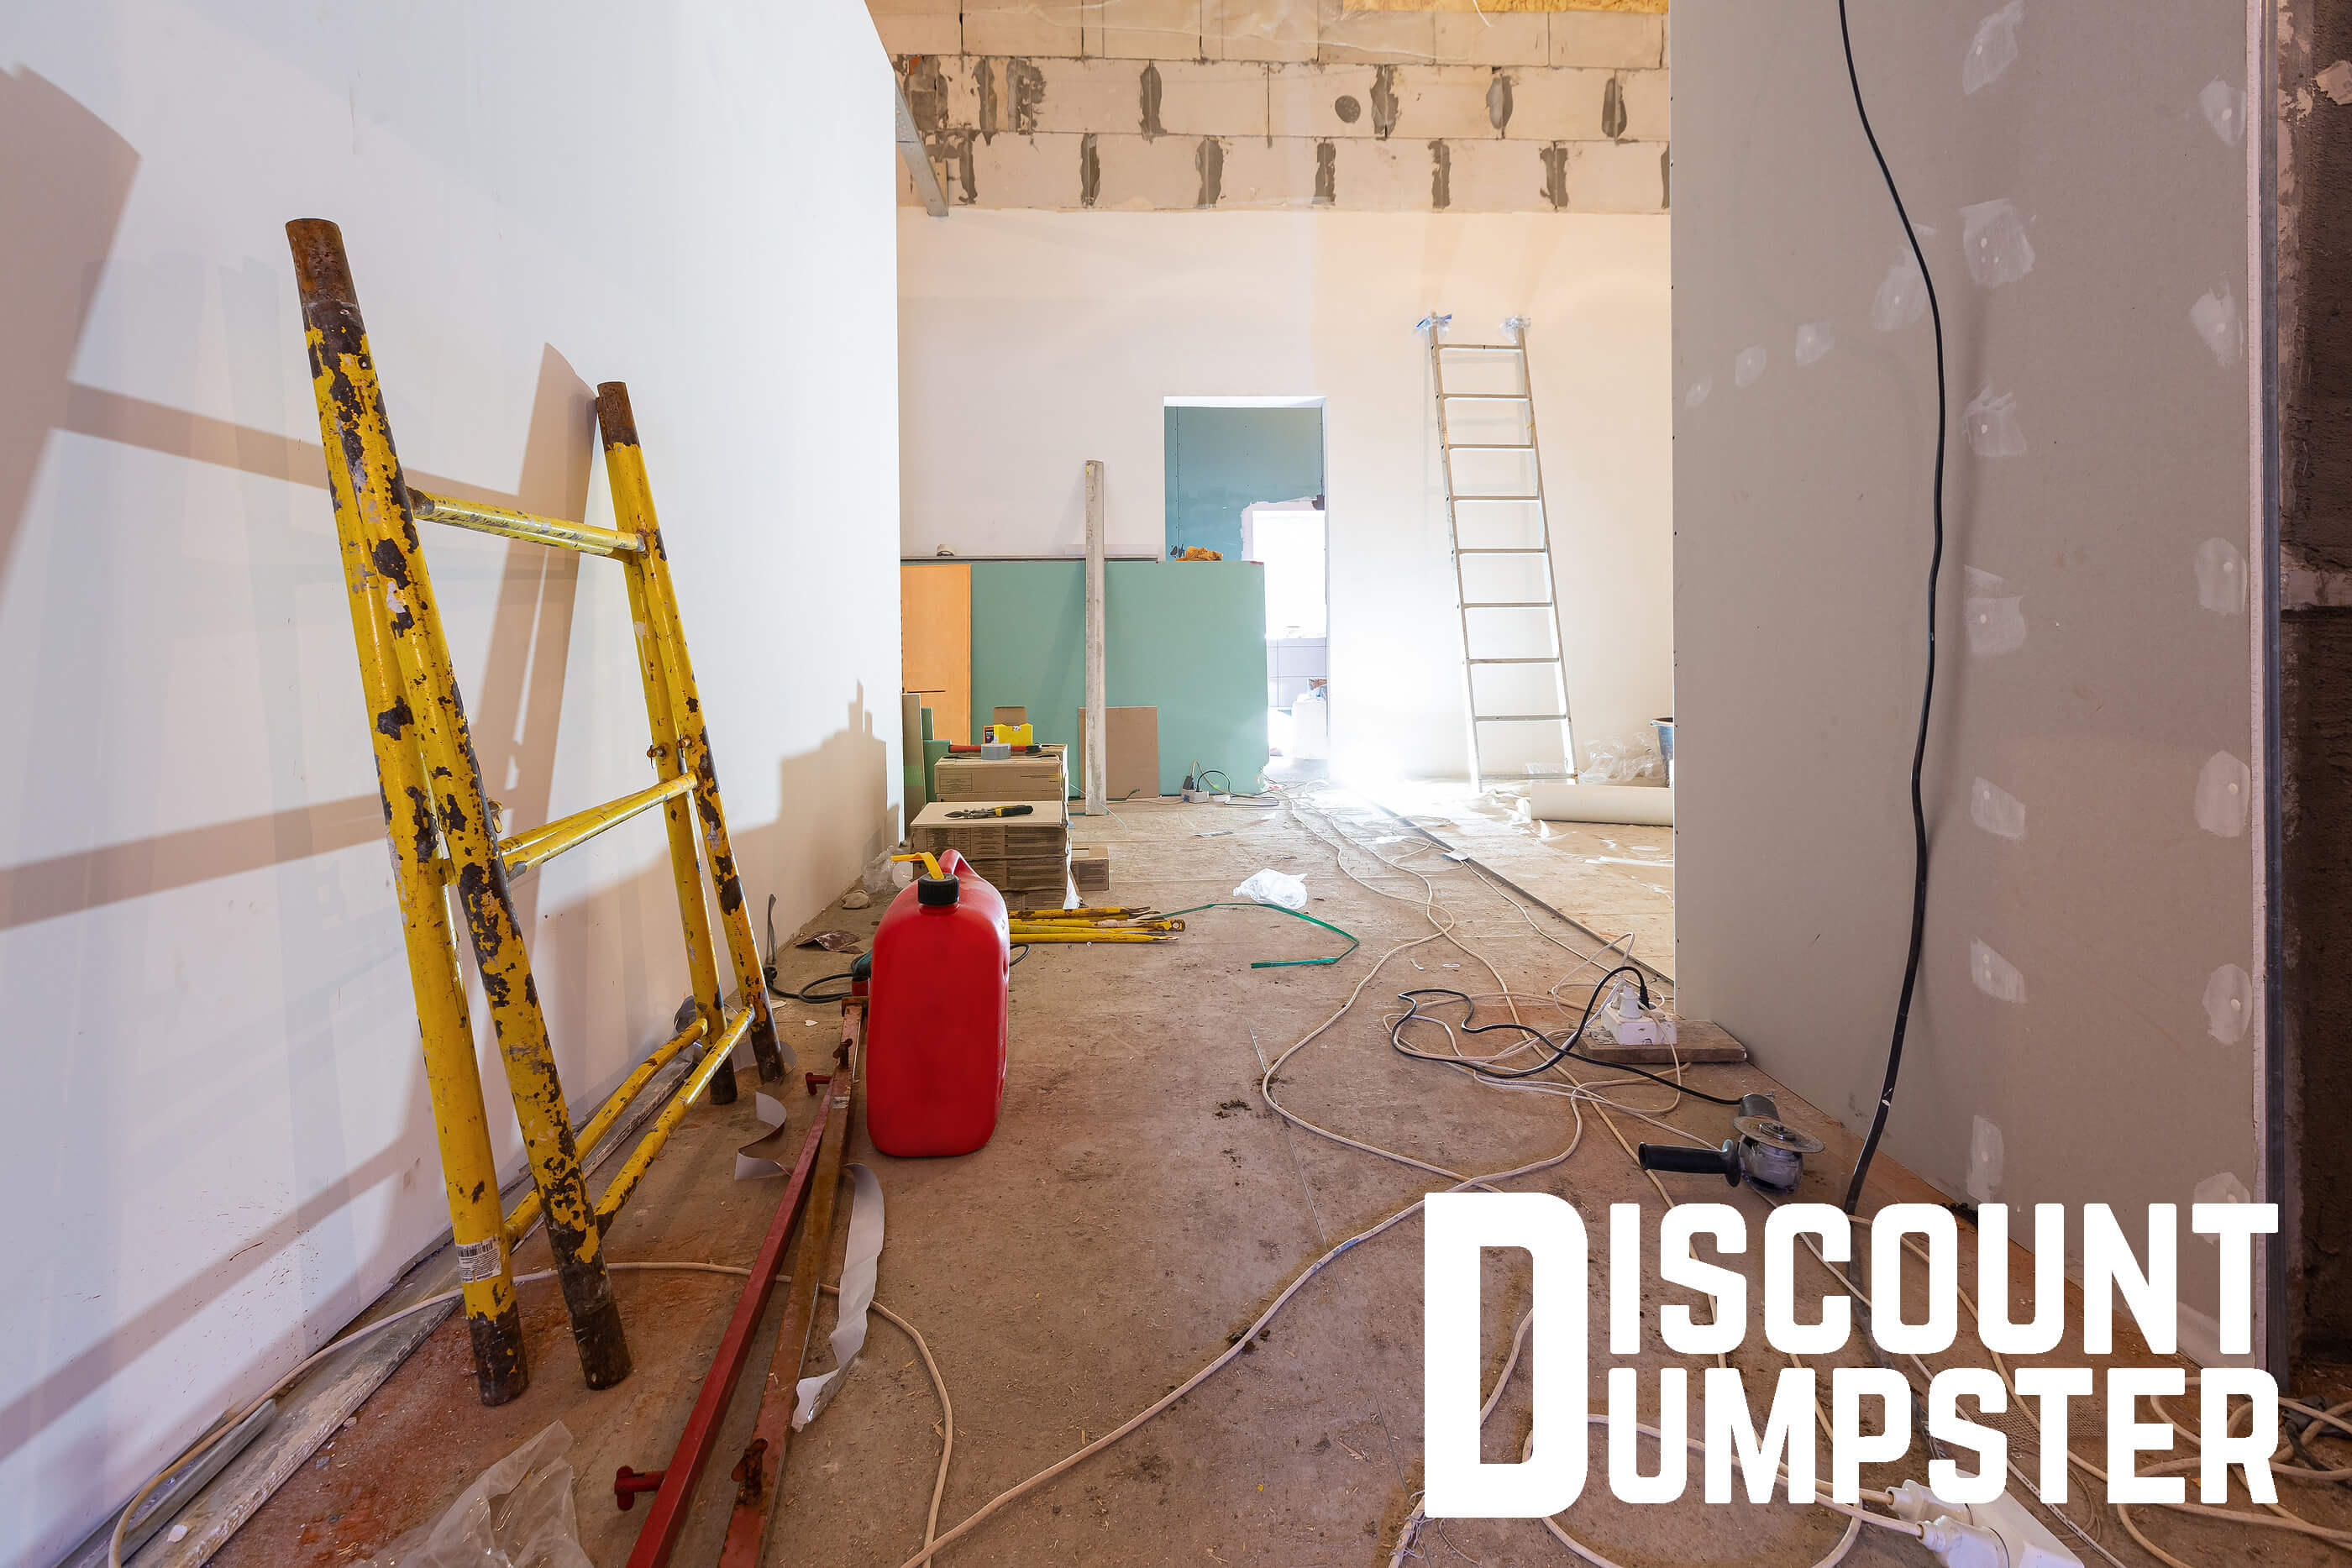 Discount dumpster takes care of all your residential and home renovation waste removal needs in Denver co